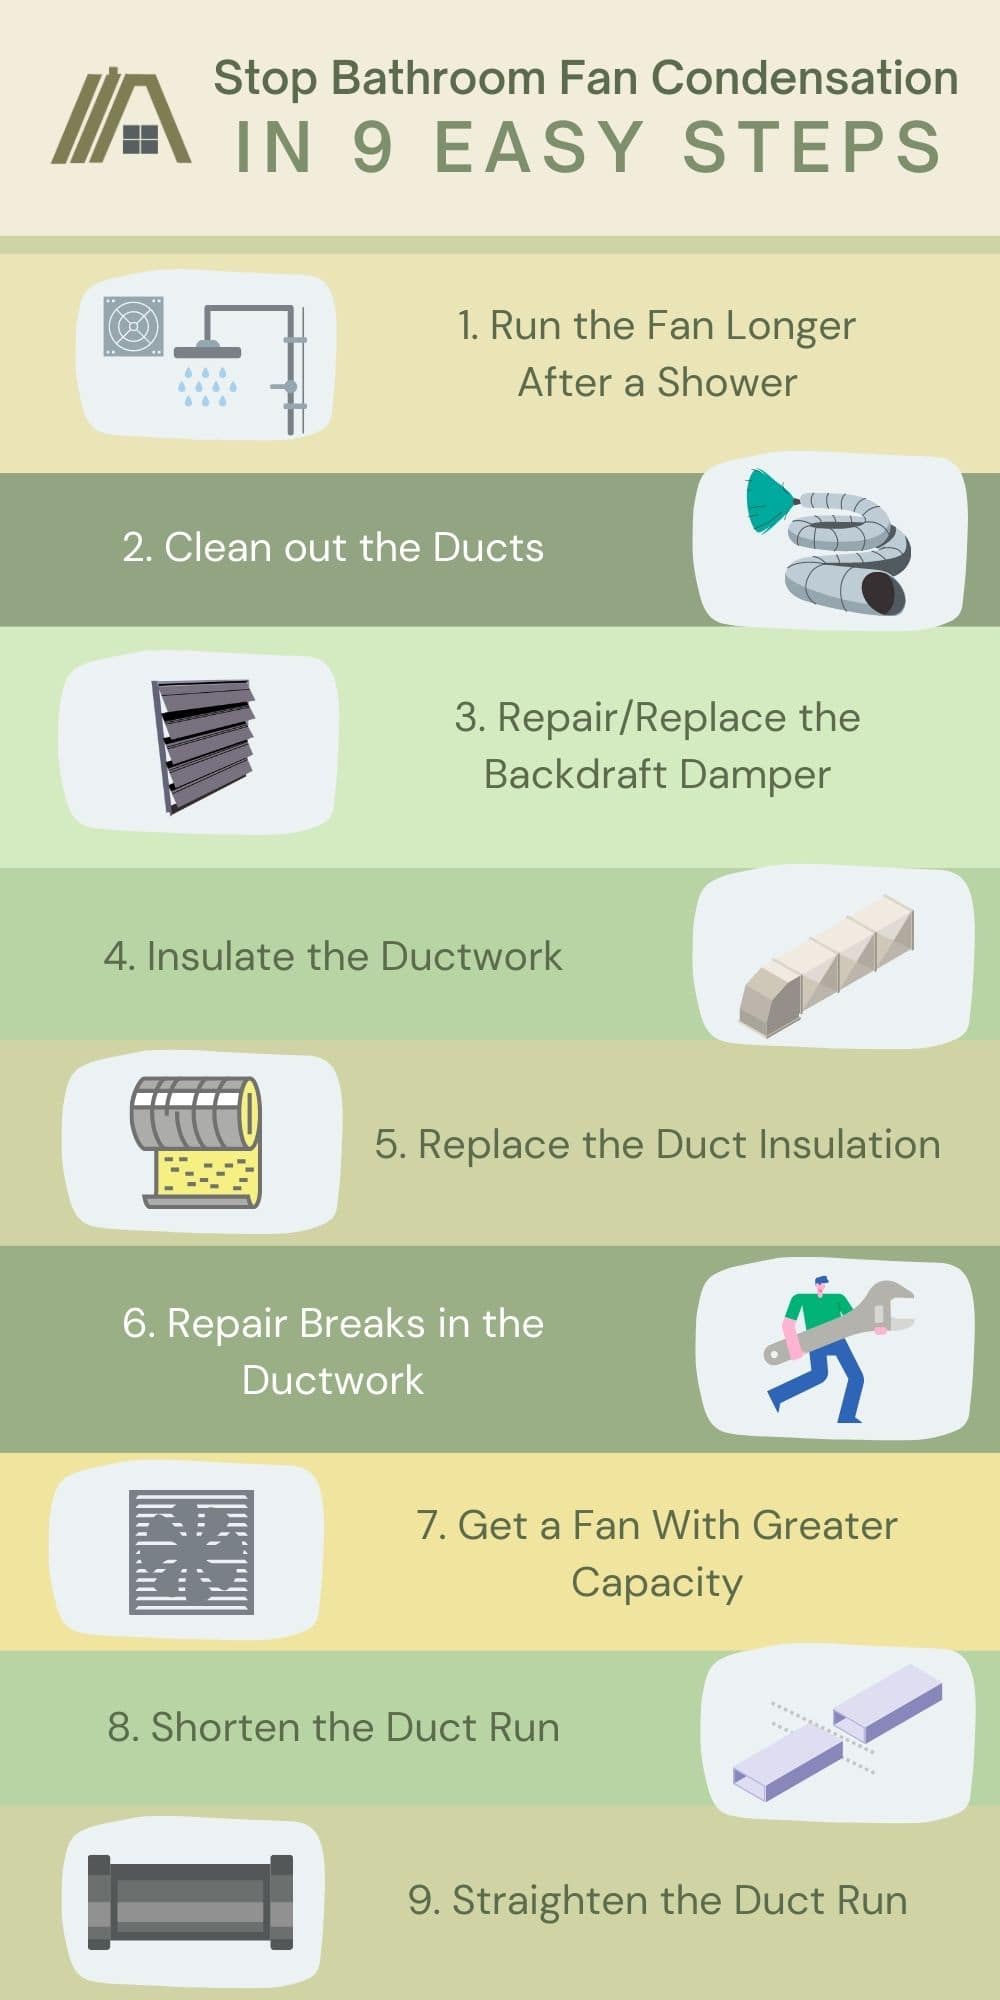 Infographics About How to Stop Bathroom Fan Condensation in 9 Easy Steps